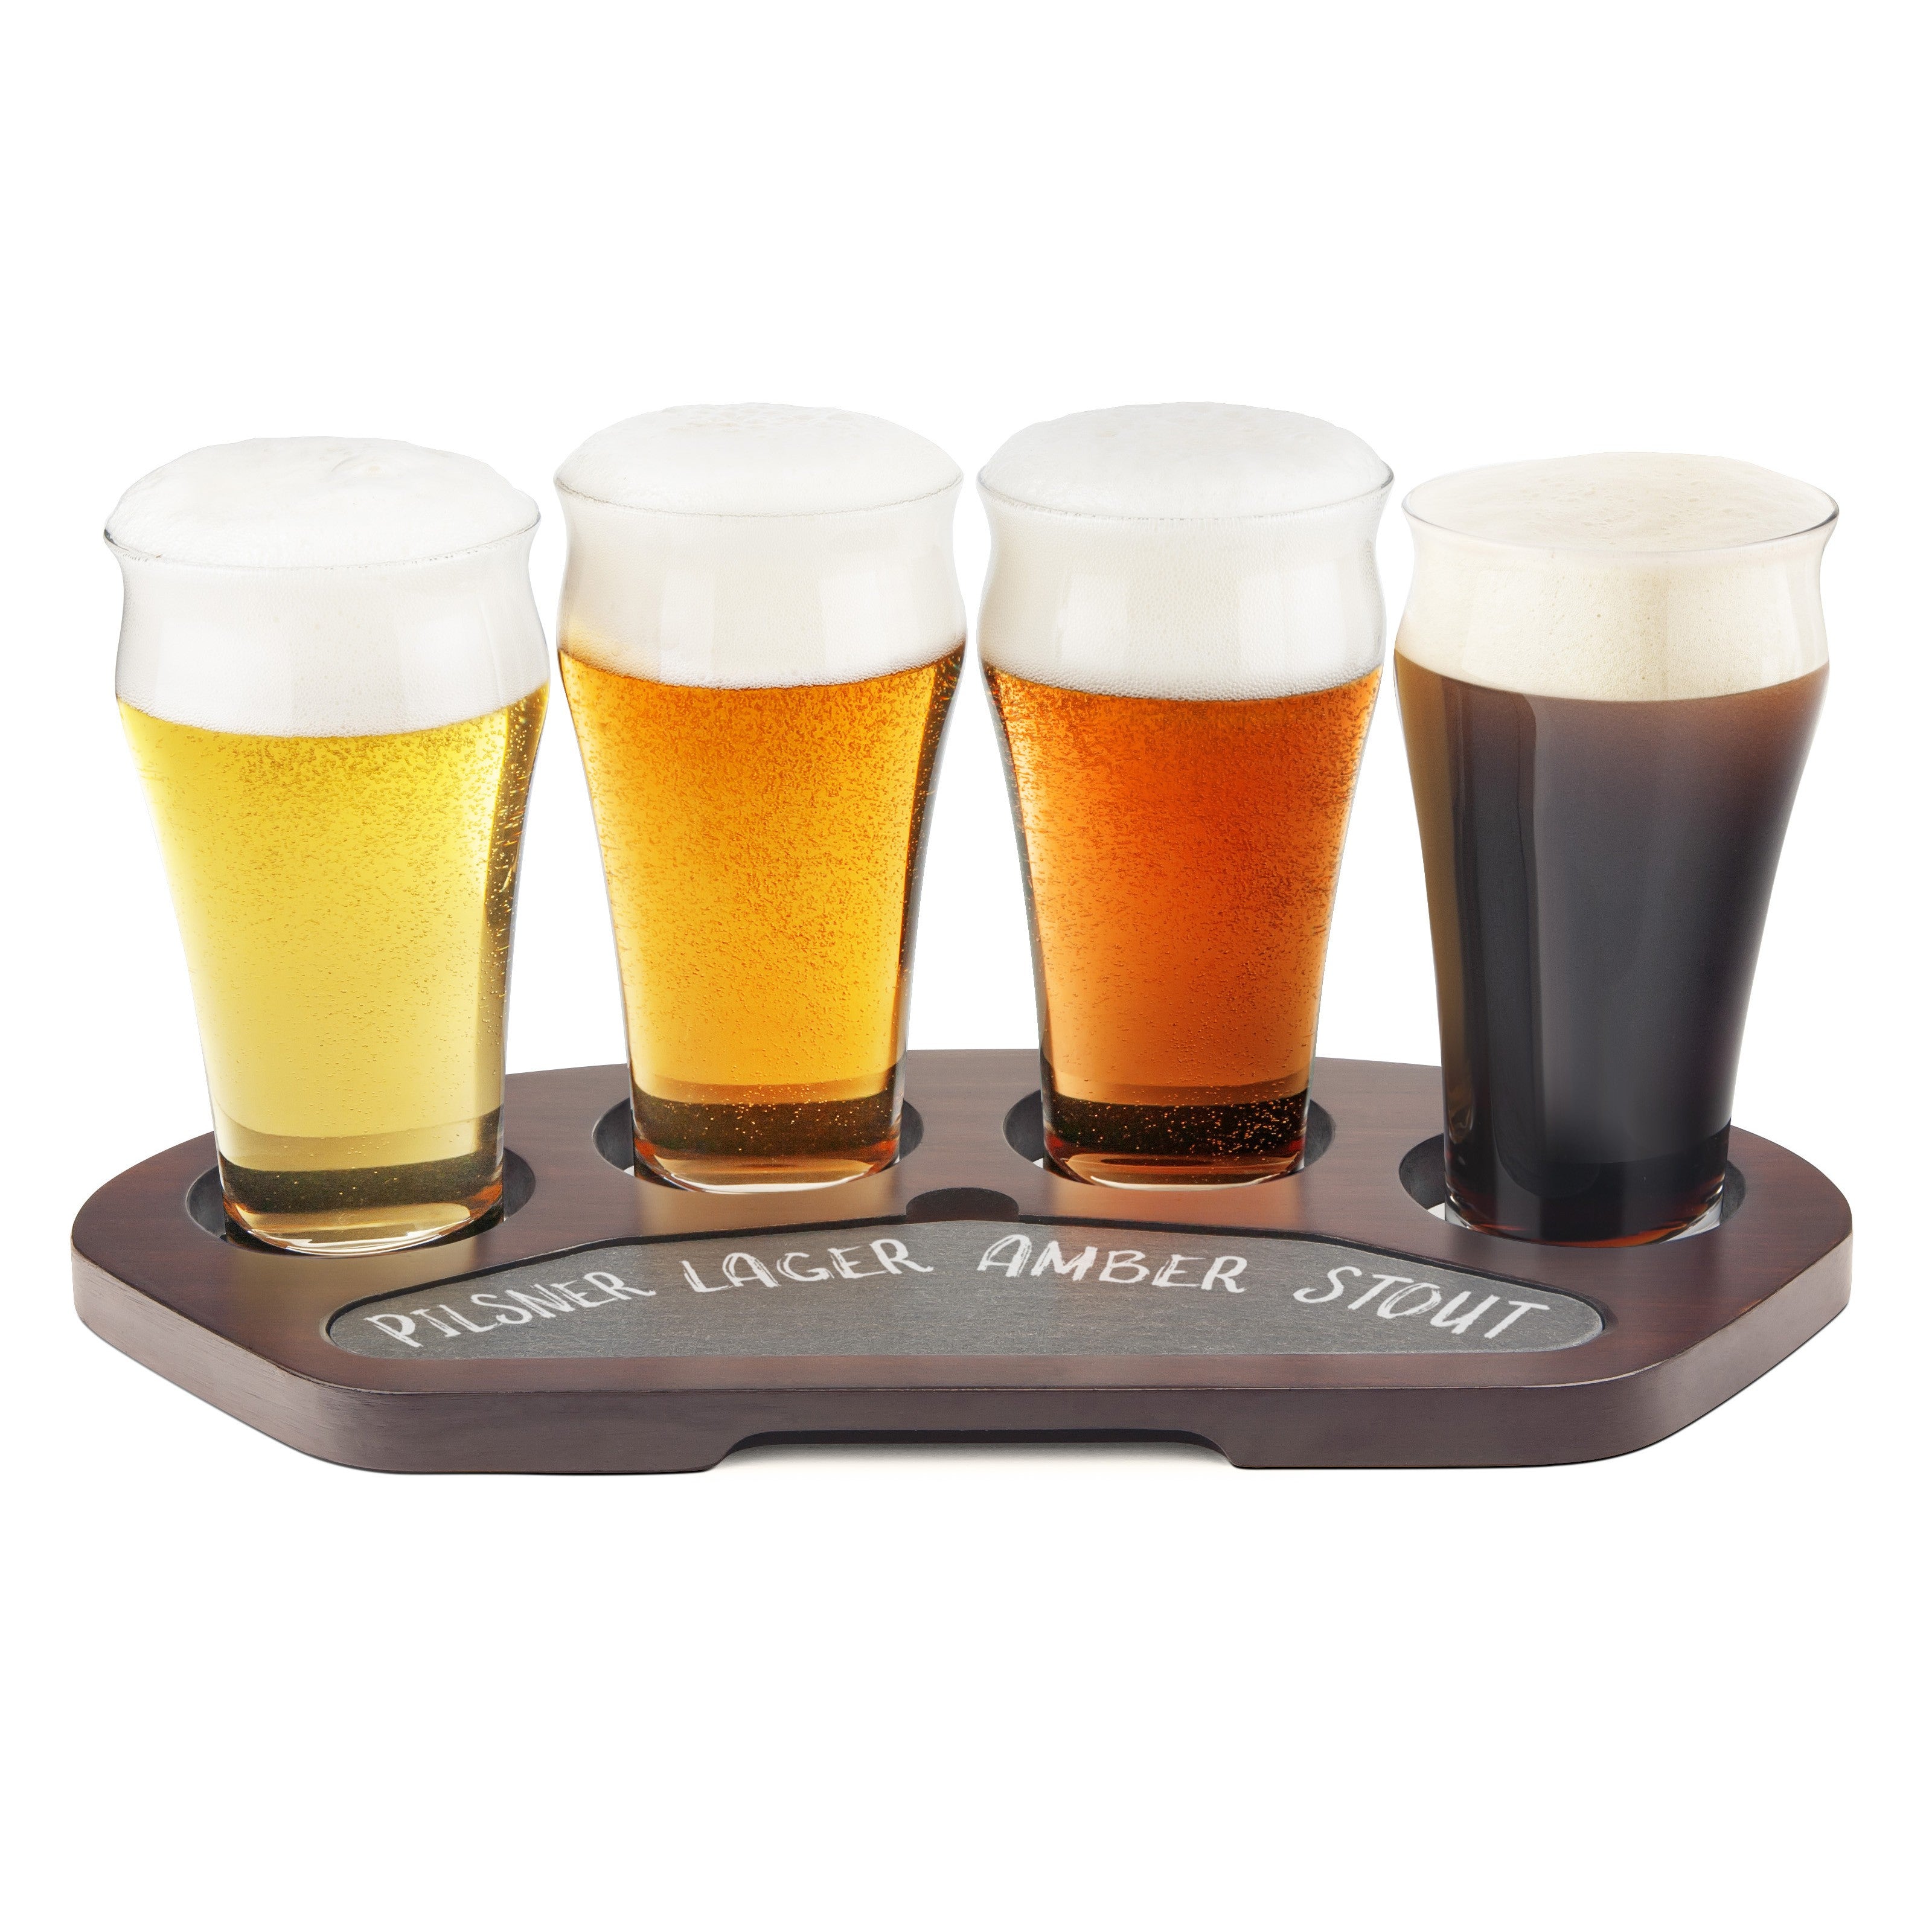 Final Touch Craft Beer Glasses s/2 - 886245009837